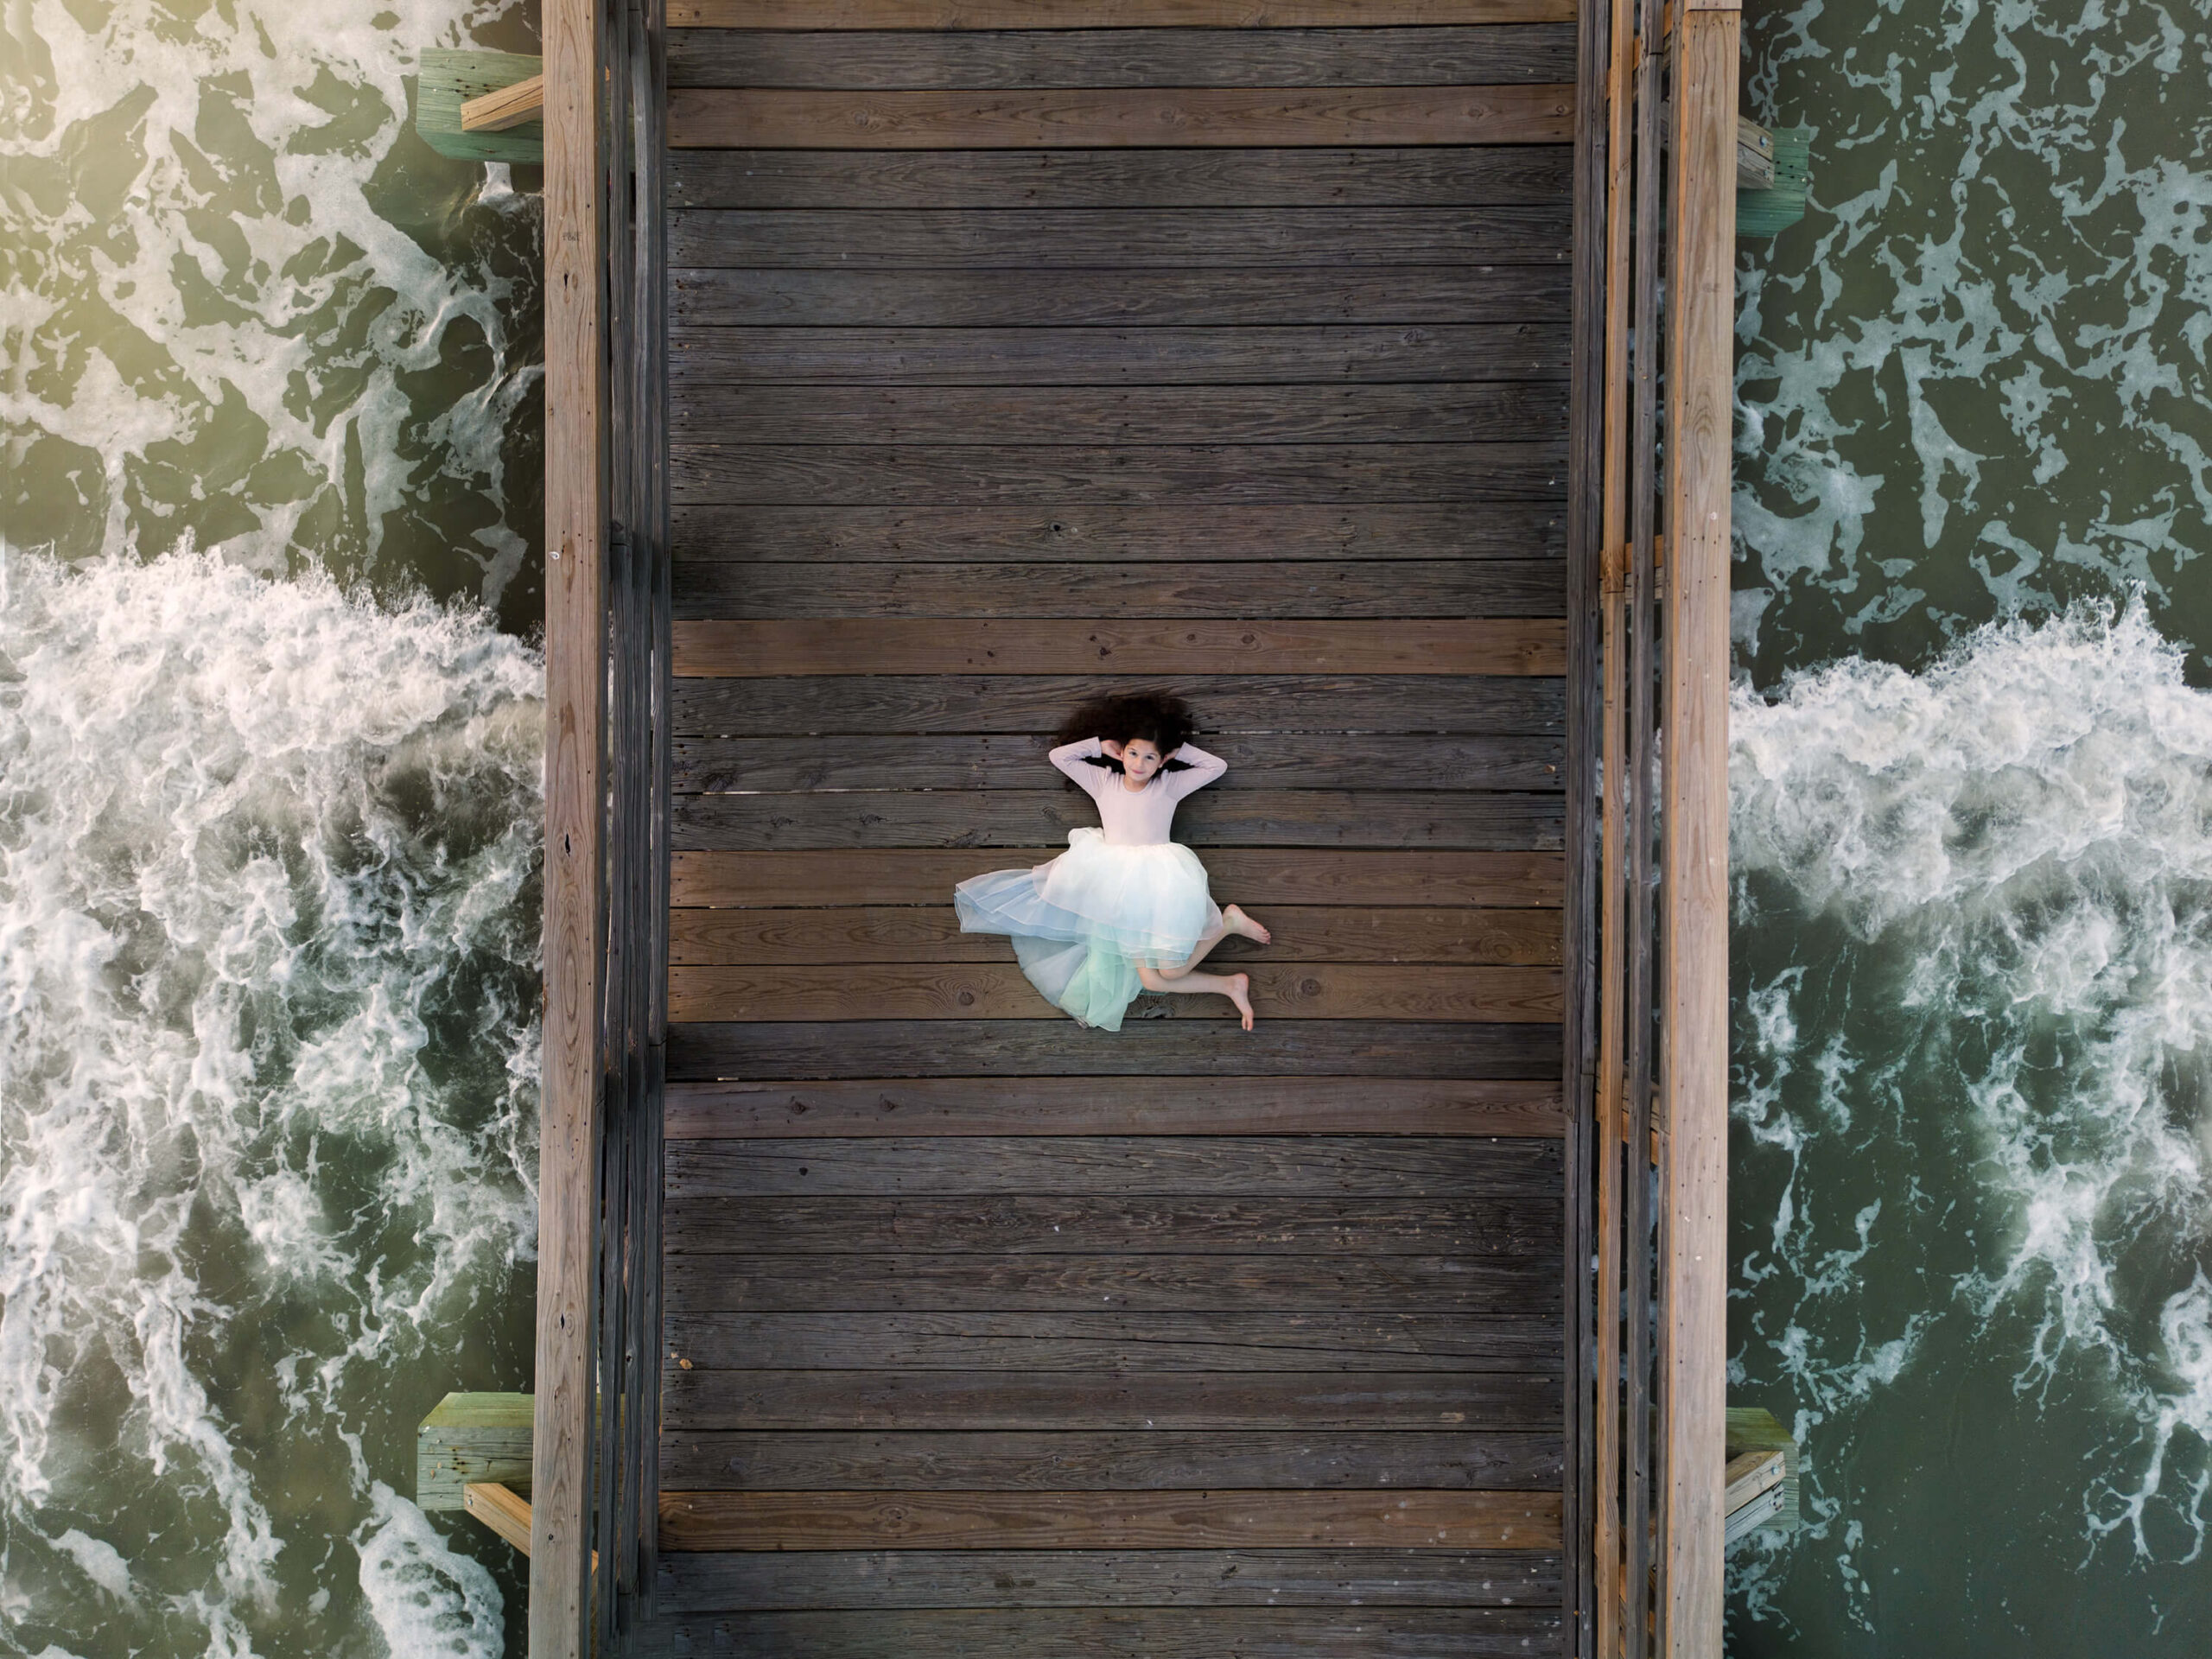 Drone photography of a little girl wearing an ombre dress at the beach showing how you can grow your photography business to the next level.